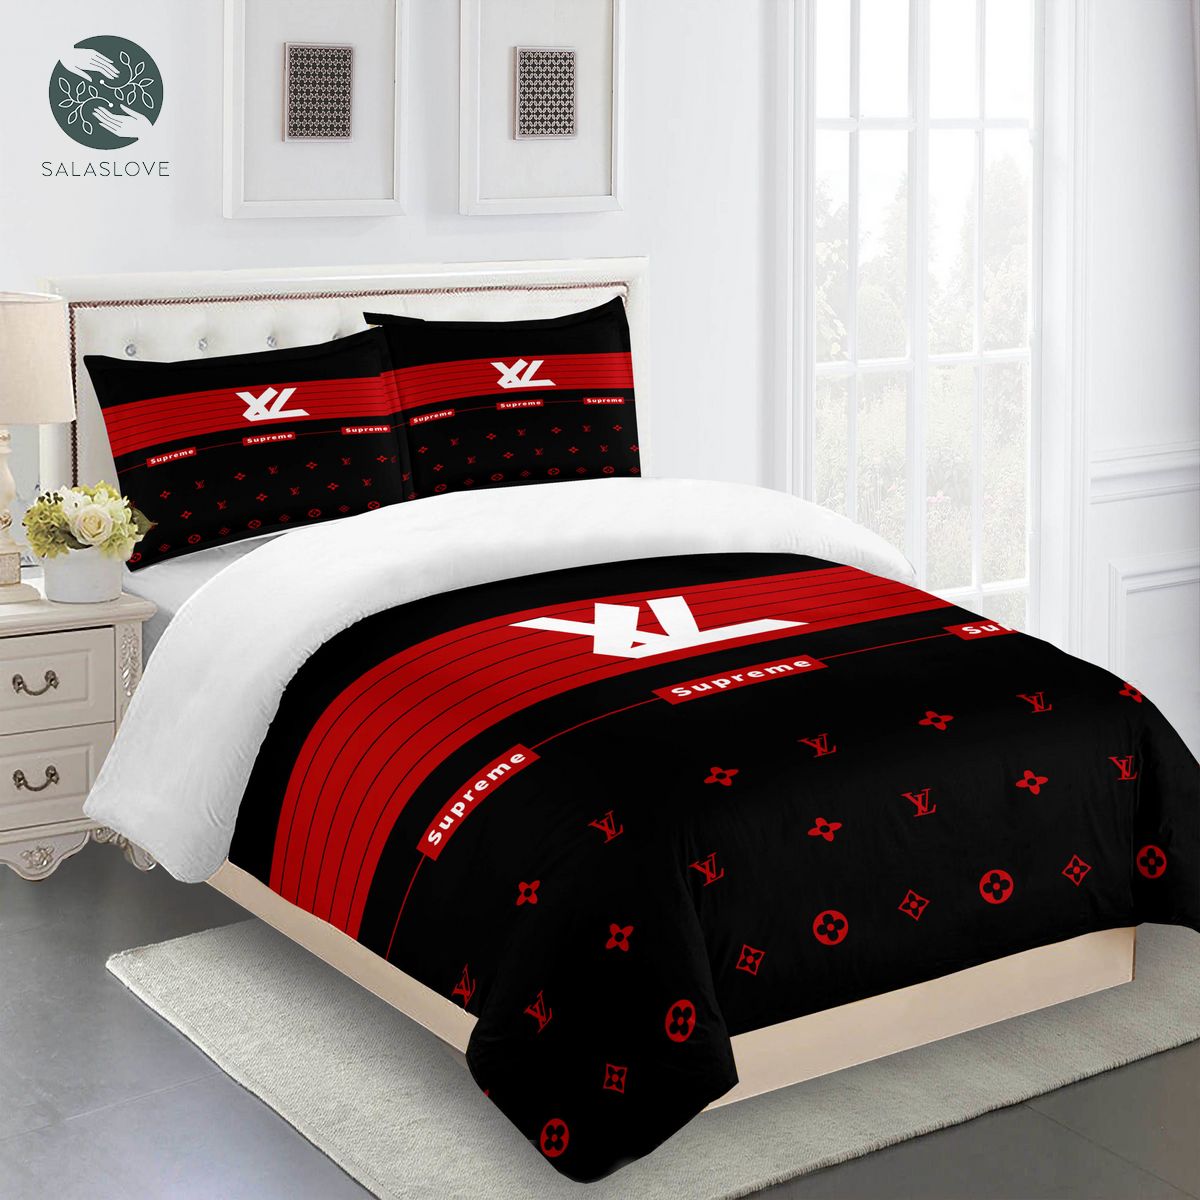 Louis Vuitton Black and Red Bedding Sets Luxury Brand Duvet Cover